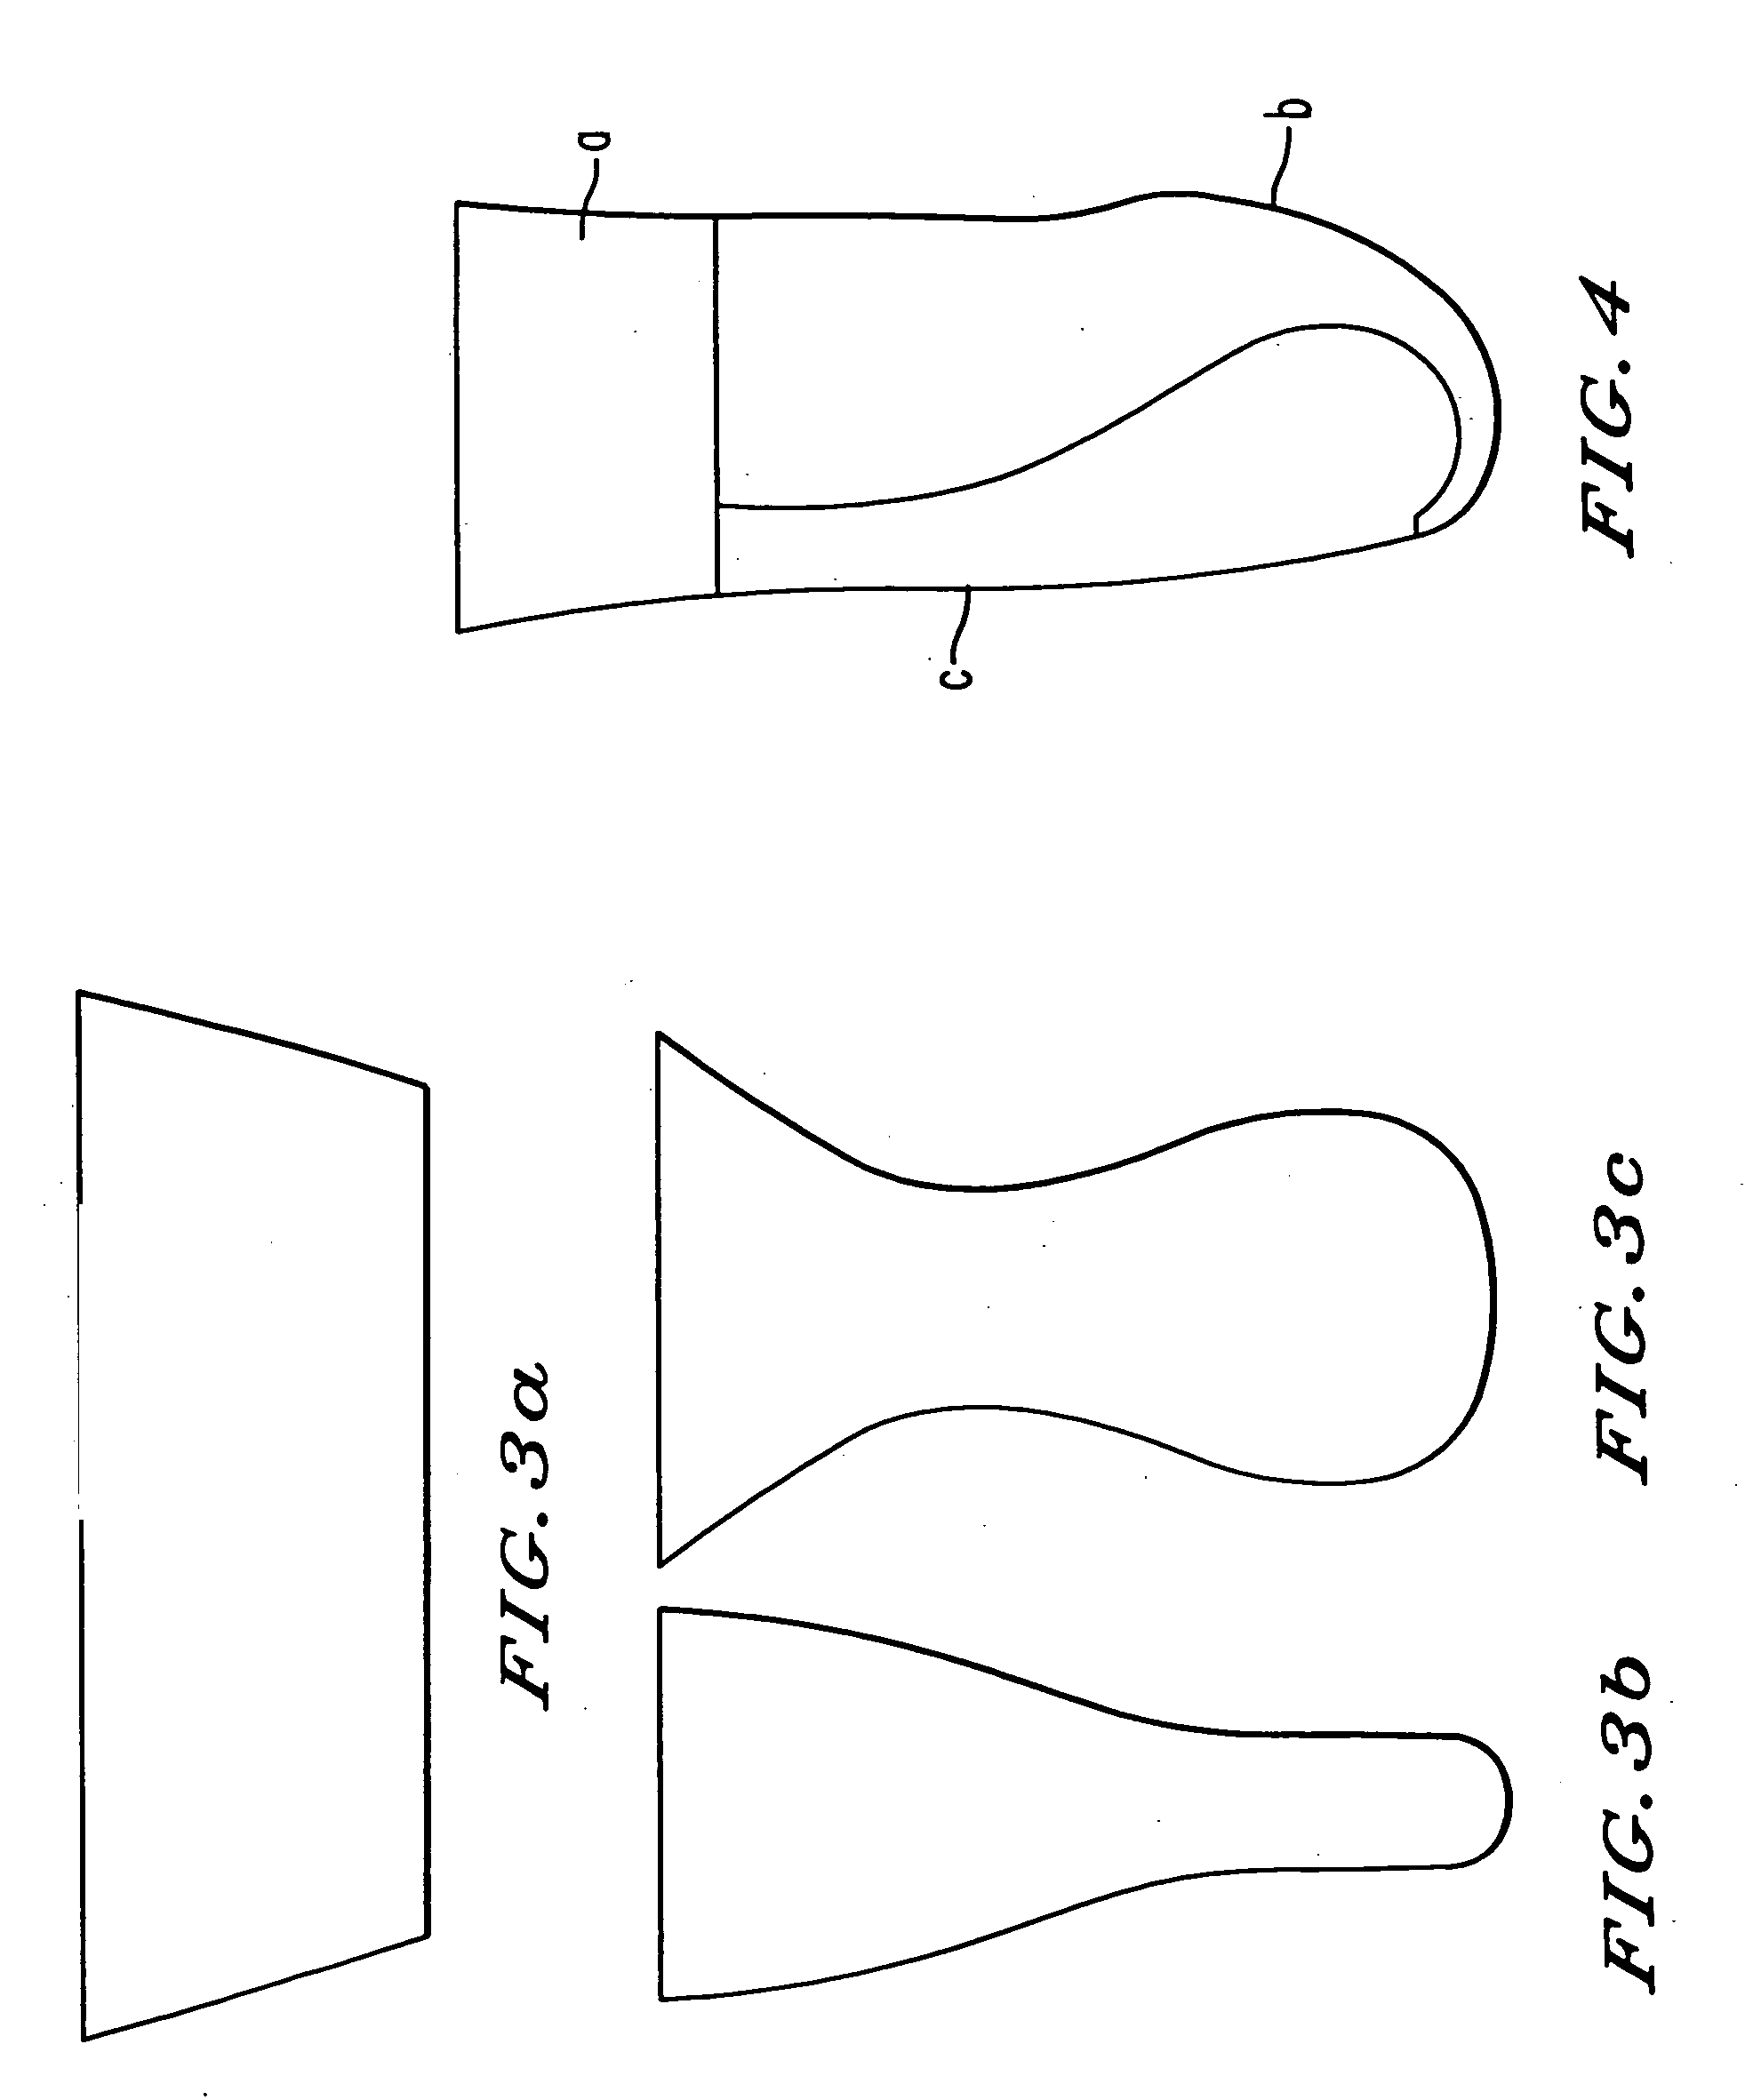 Gel and cushioning devices